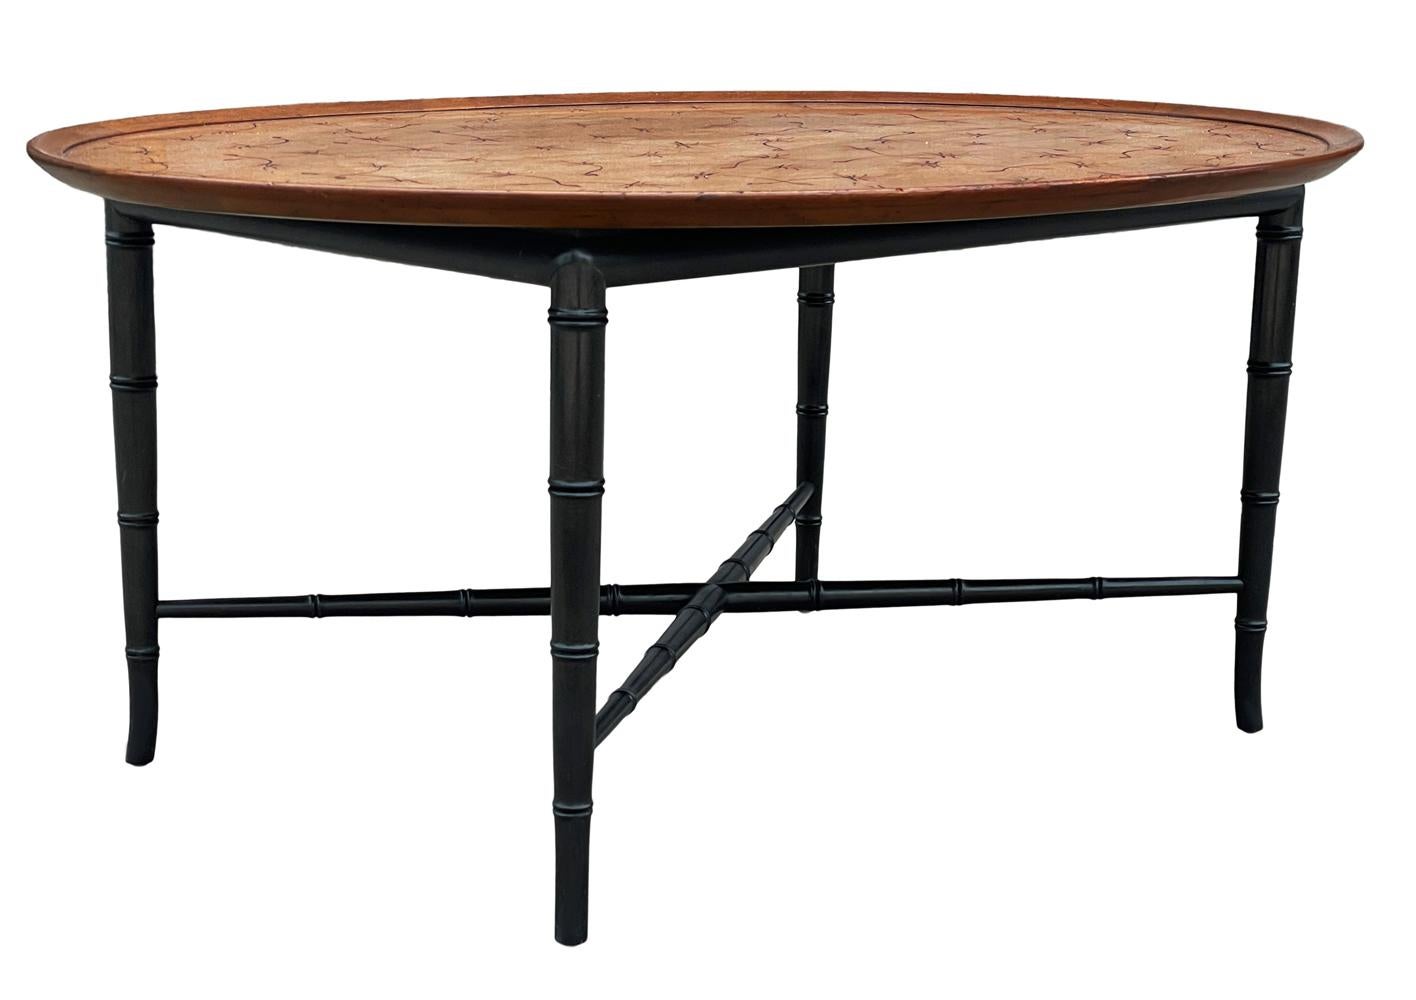 American Hollywood Regency Faux Bamboo Tray Cocktail Table with Oak Top by Kittinger For Sale